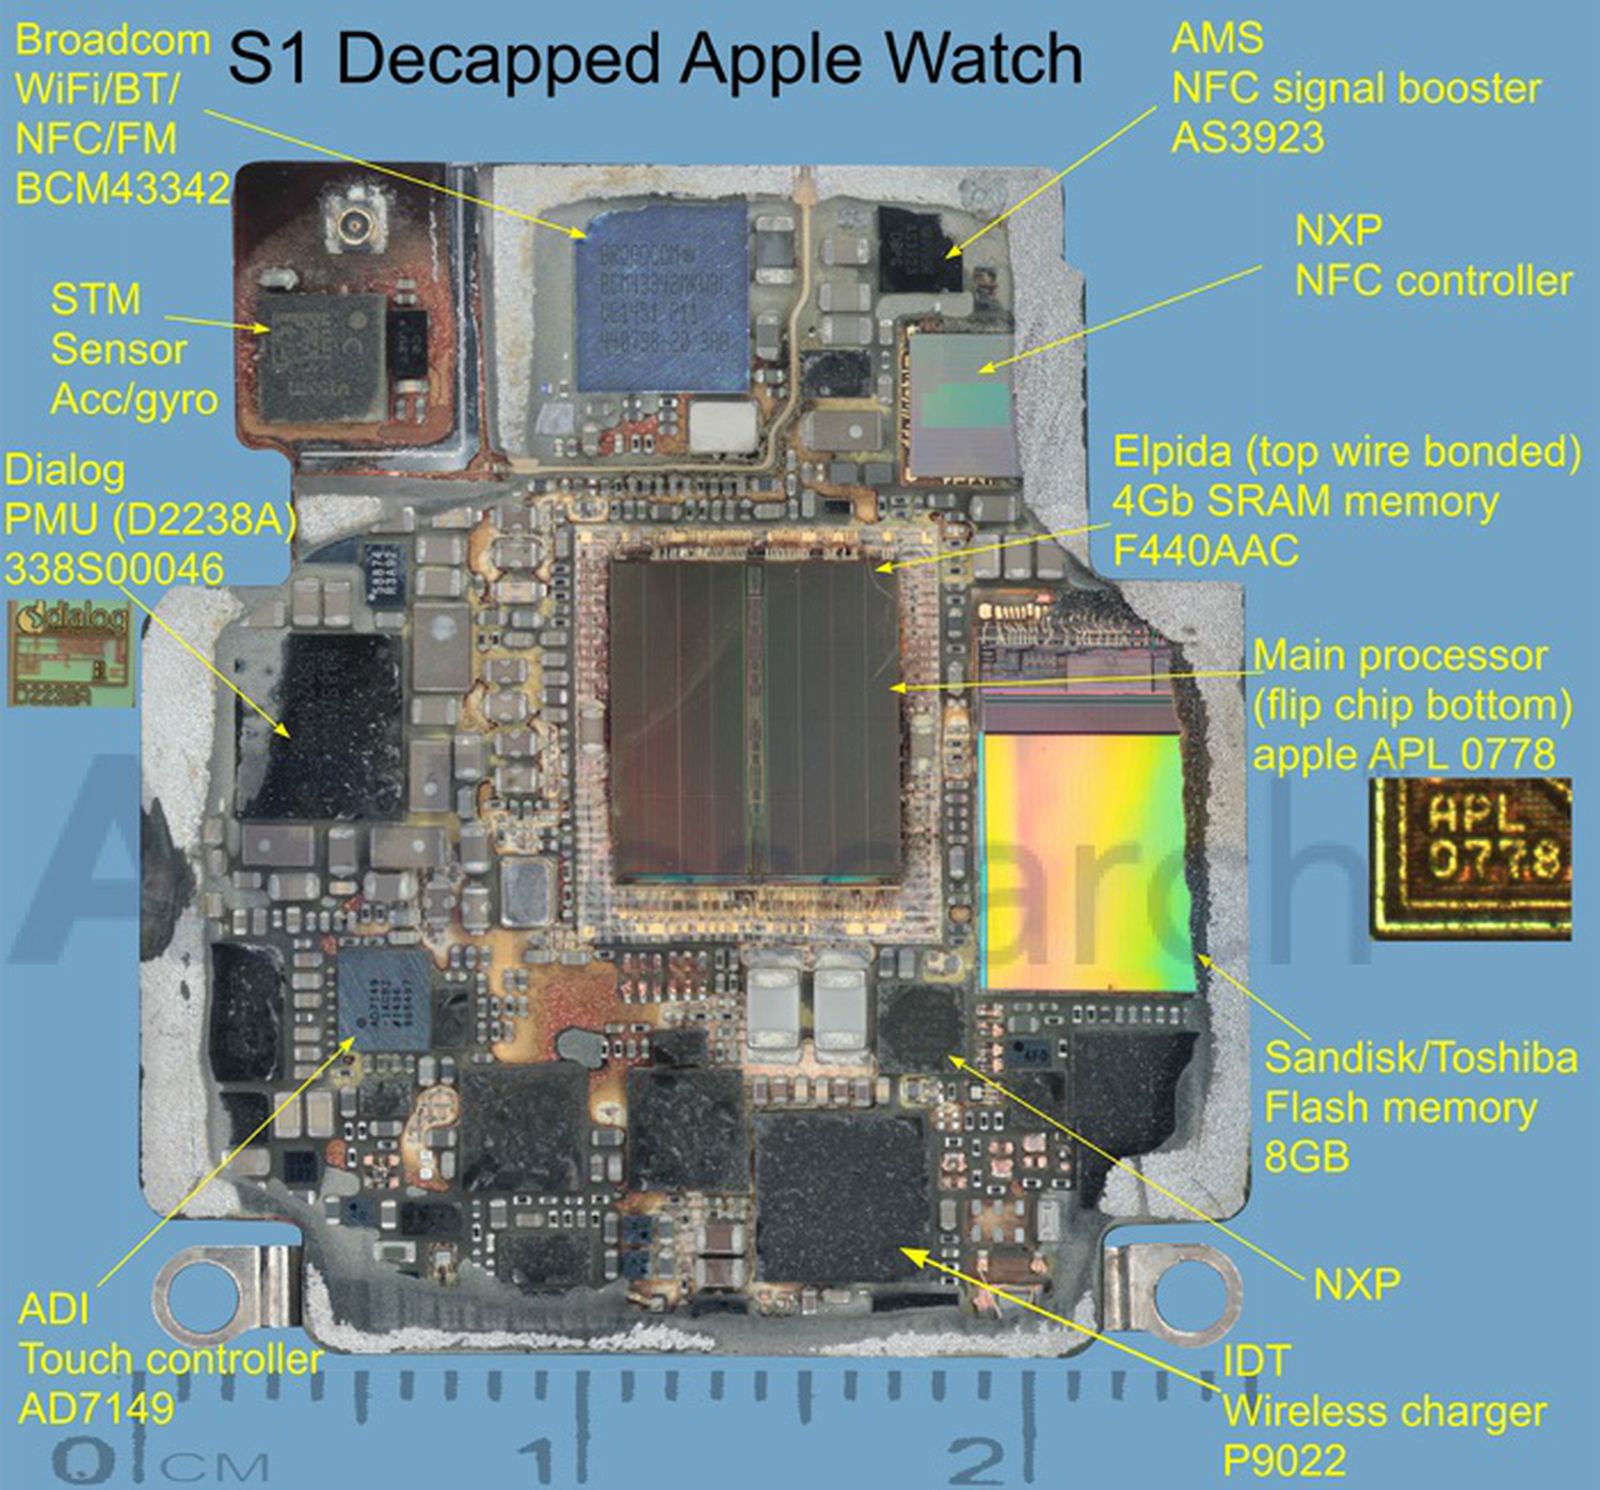 Early Looks Apple Watch's S1 Chip Confirm 512 Unexpected Suppliers - MacRumors